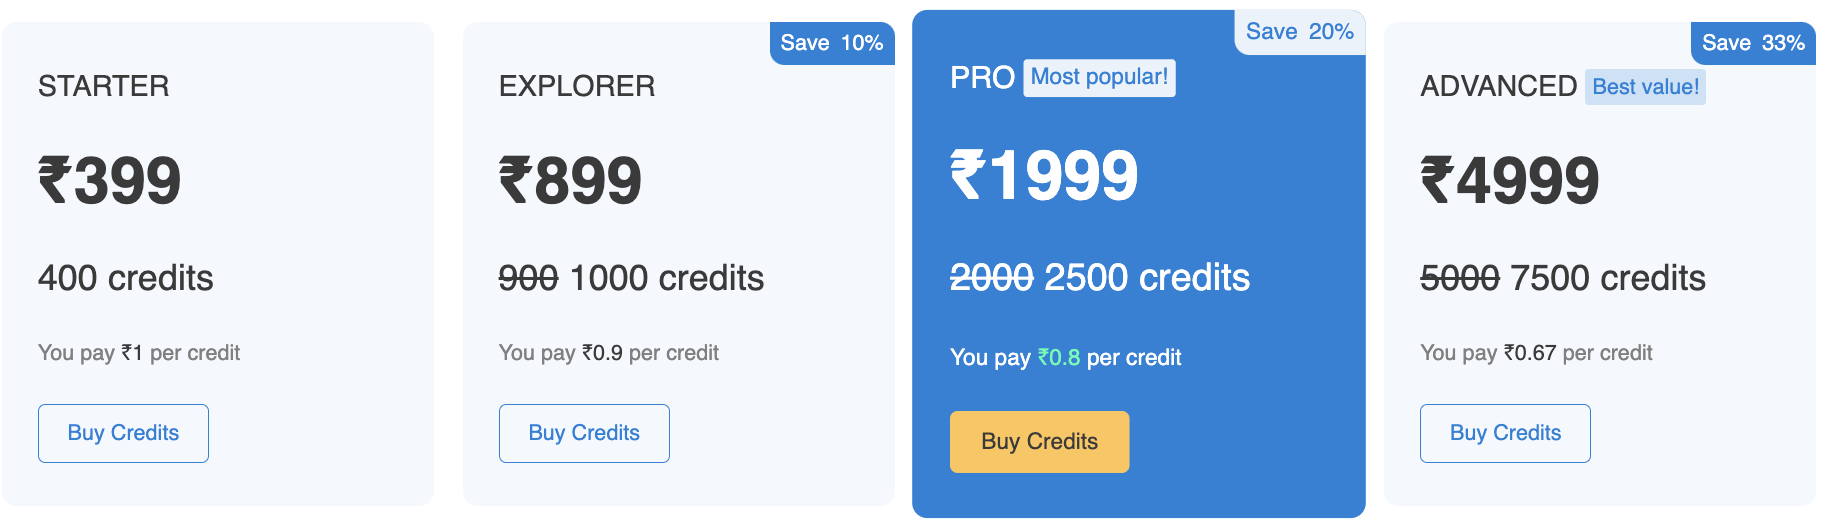 AlgoTest Credits and Pricing